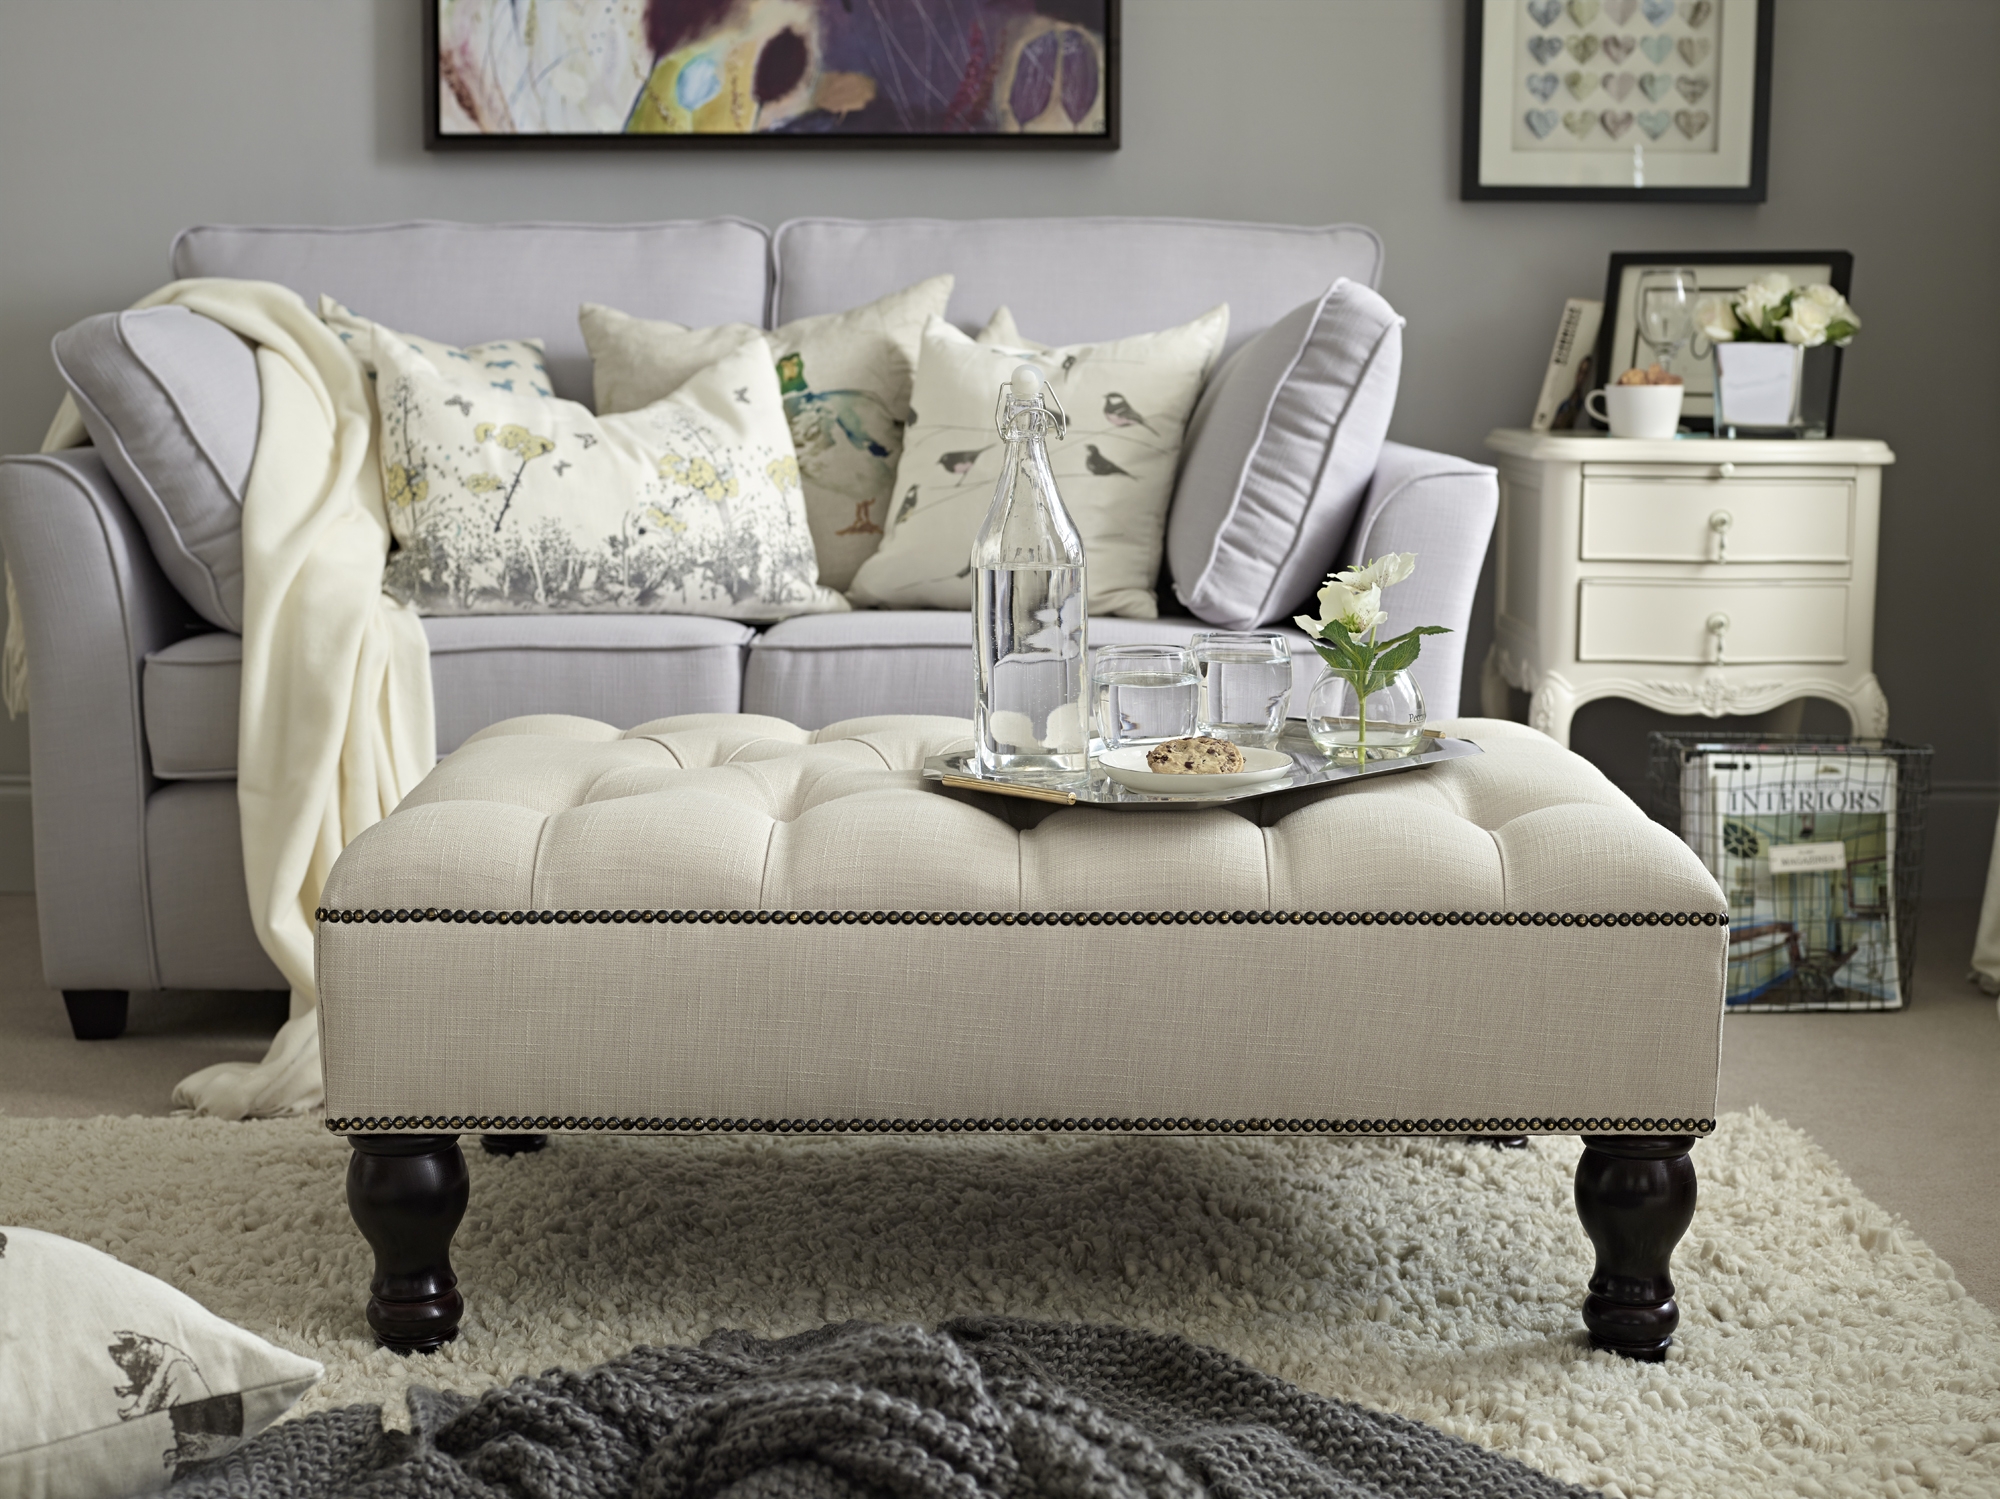 48 hour exclusive offer on our new footstools, ottomans & blanket boxes!